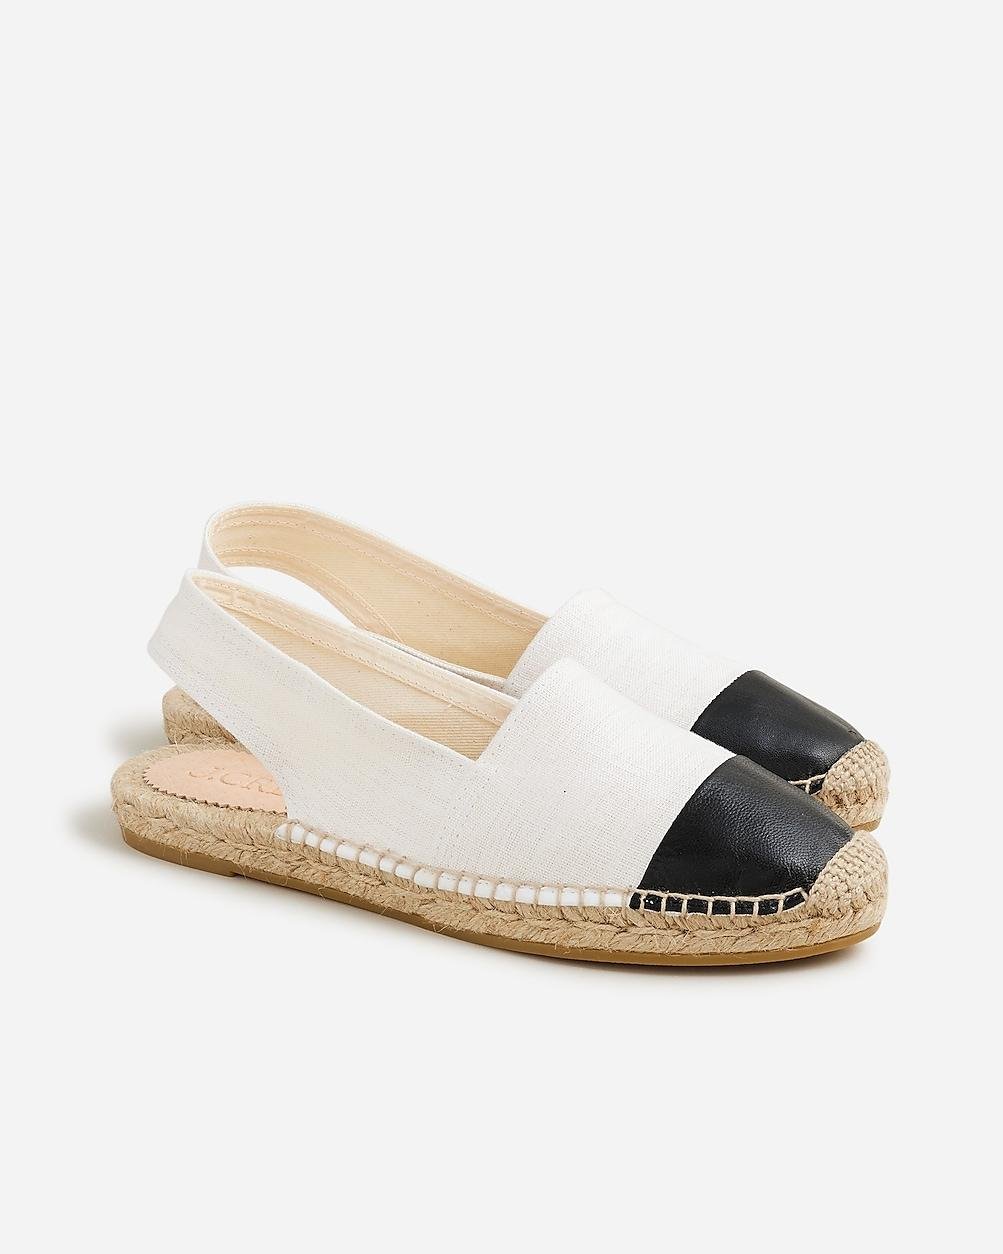 Made-in-Spain cap toe slingback espadrilles in canvas by J.CREW